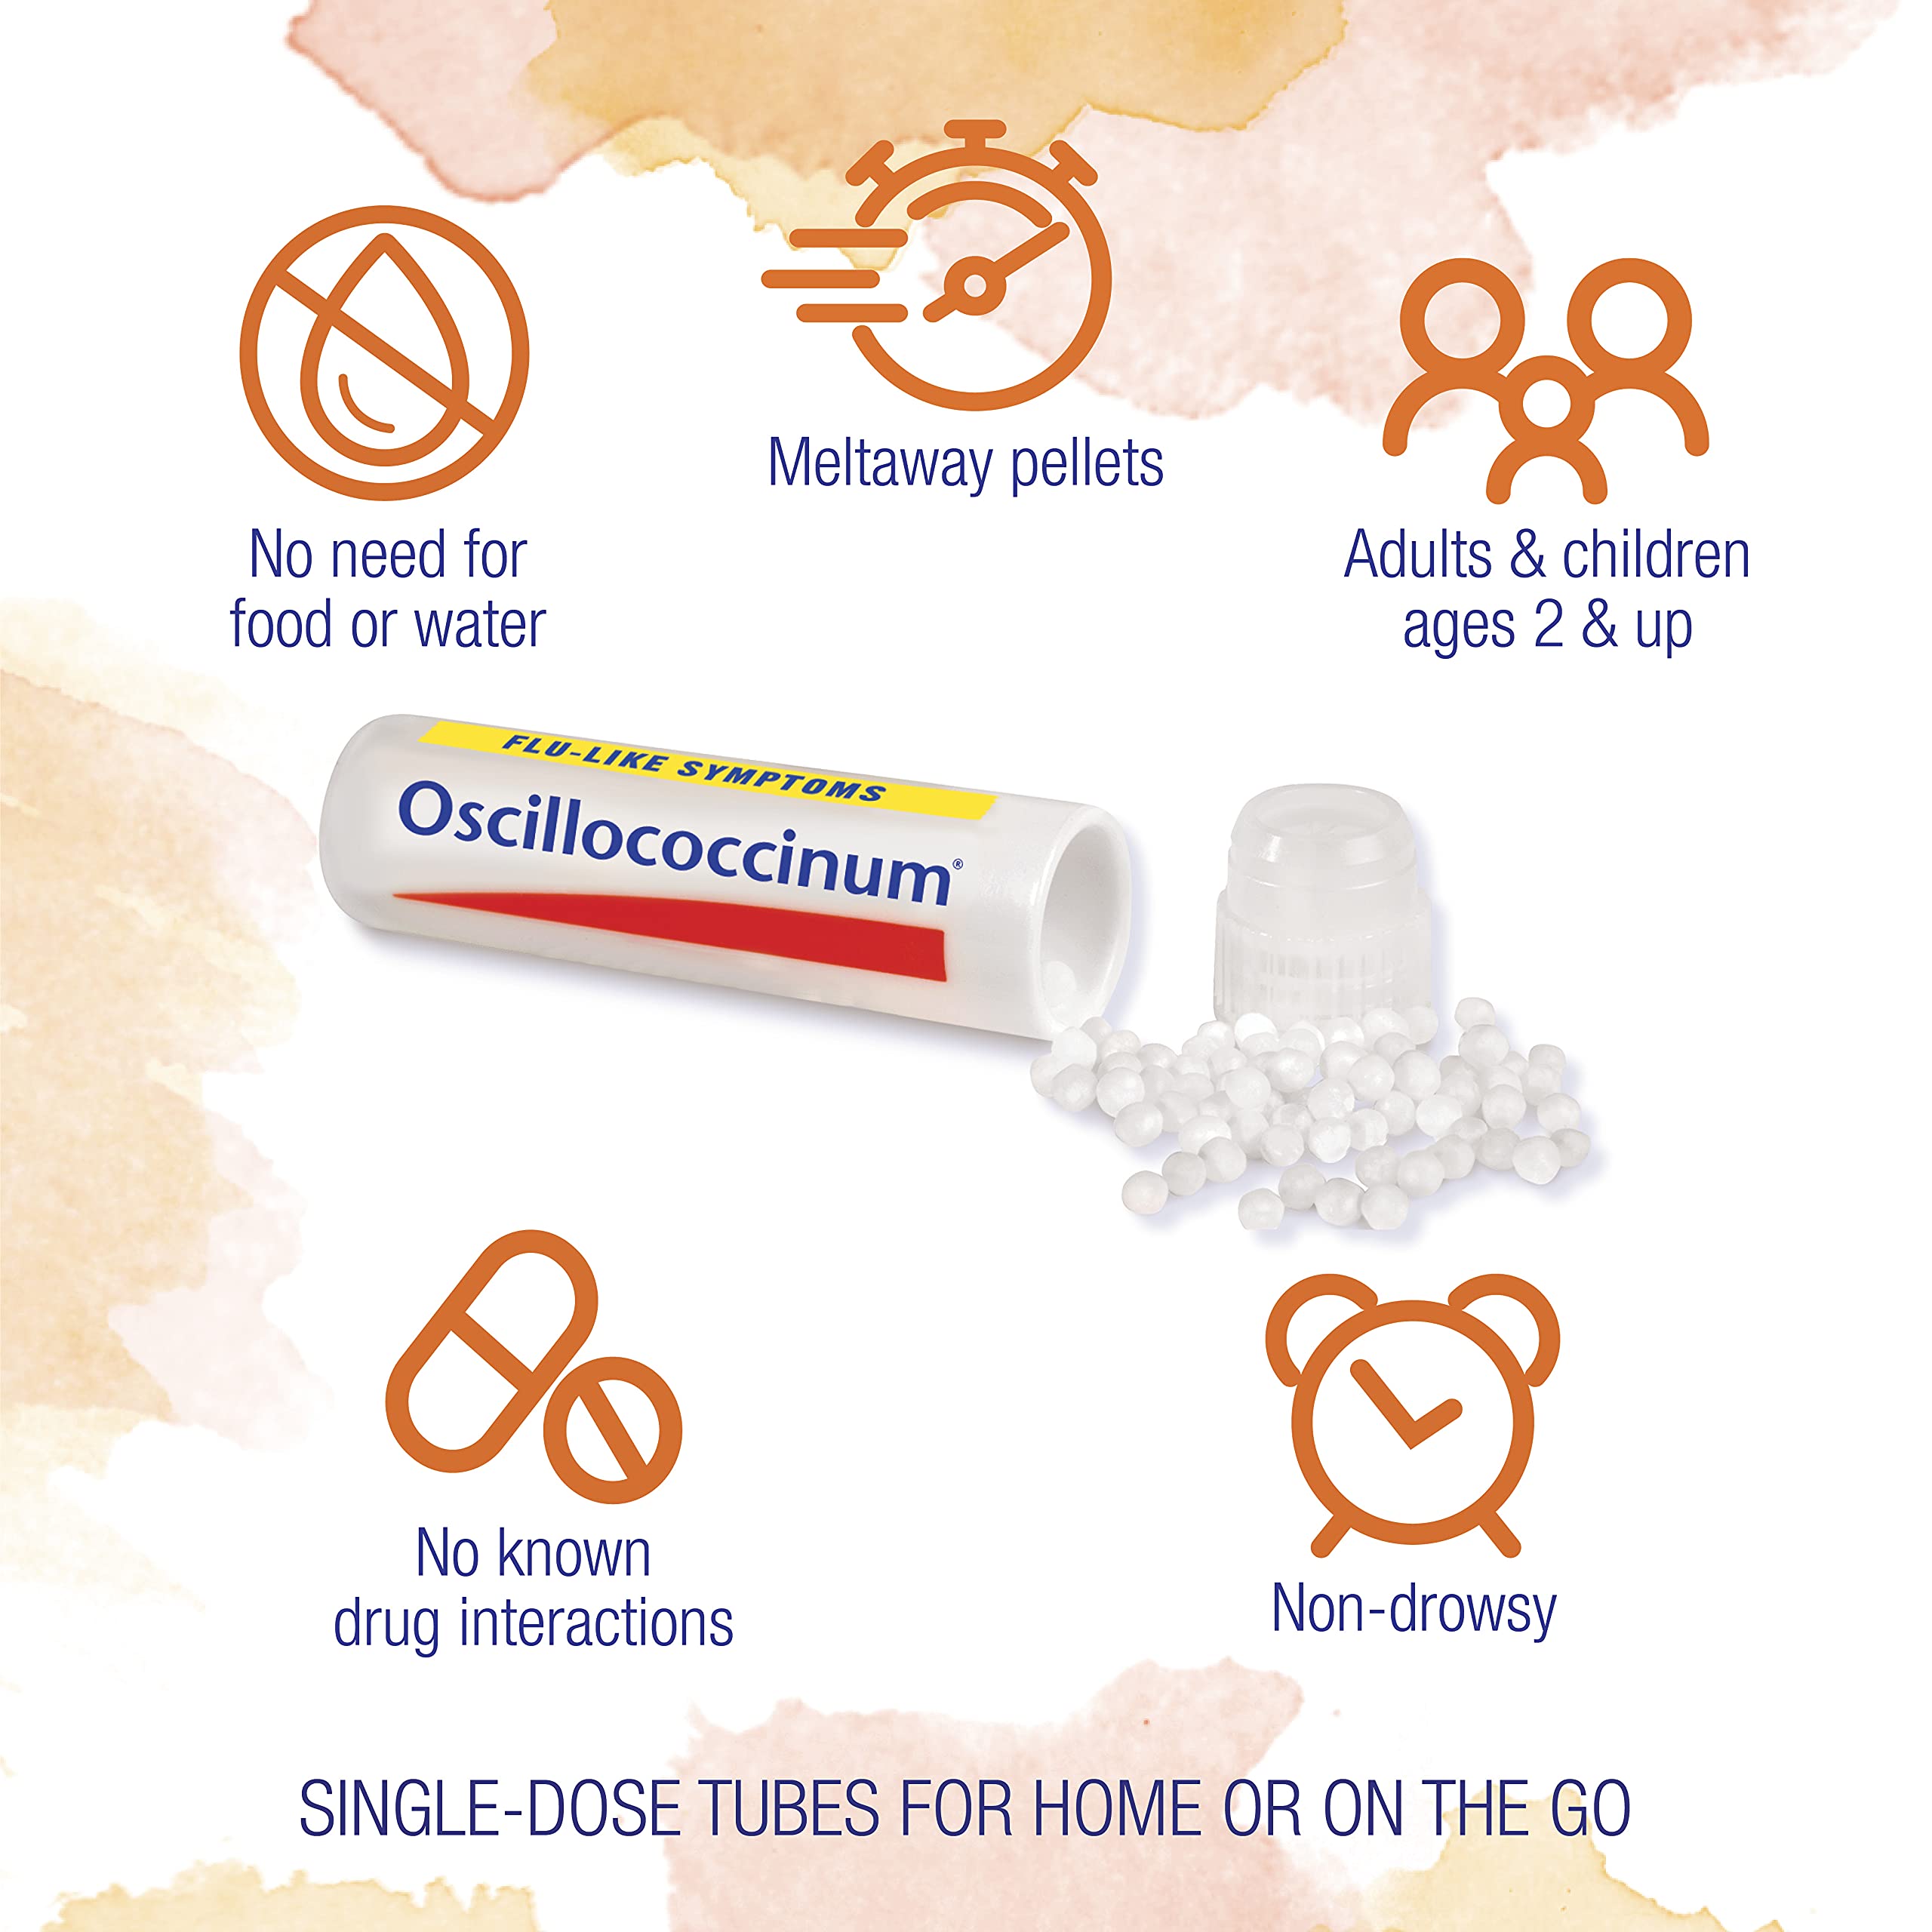 Boiron Oscillococcinum for Relief from Flu-Like Symptoms of Body Aches & ColdCalm Tablets for Cold Symptoms of Sneezing, Runny Nose, and Sore Throat - 120 Count